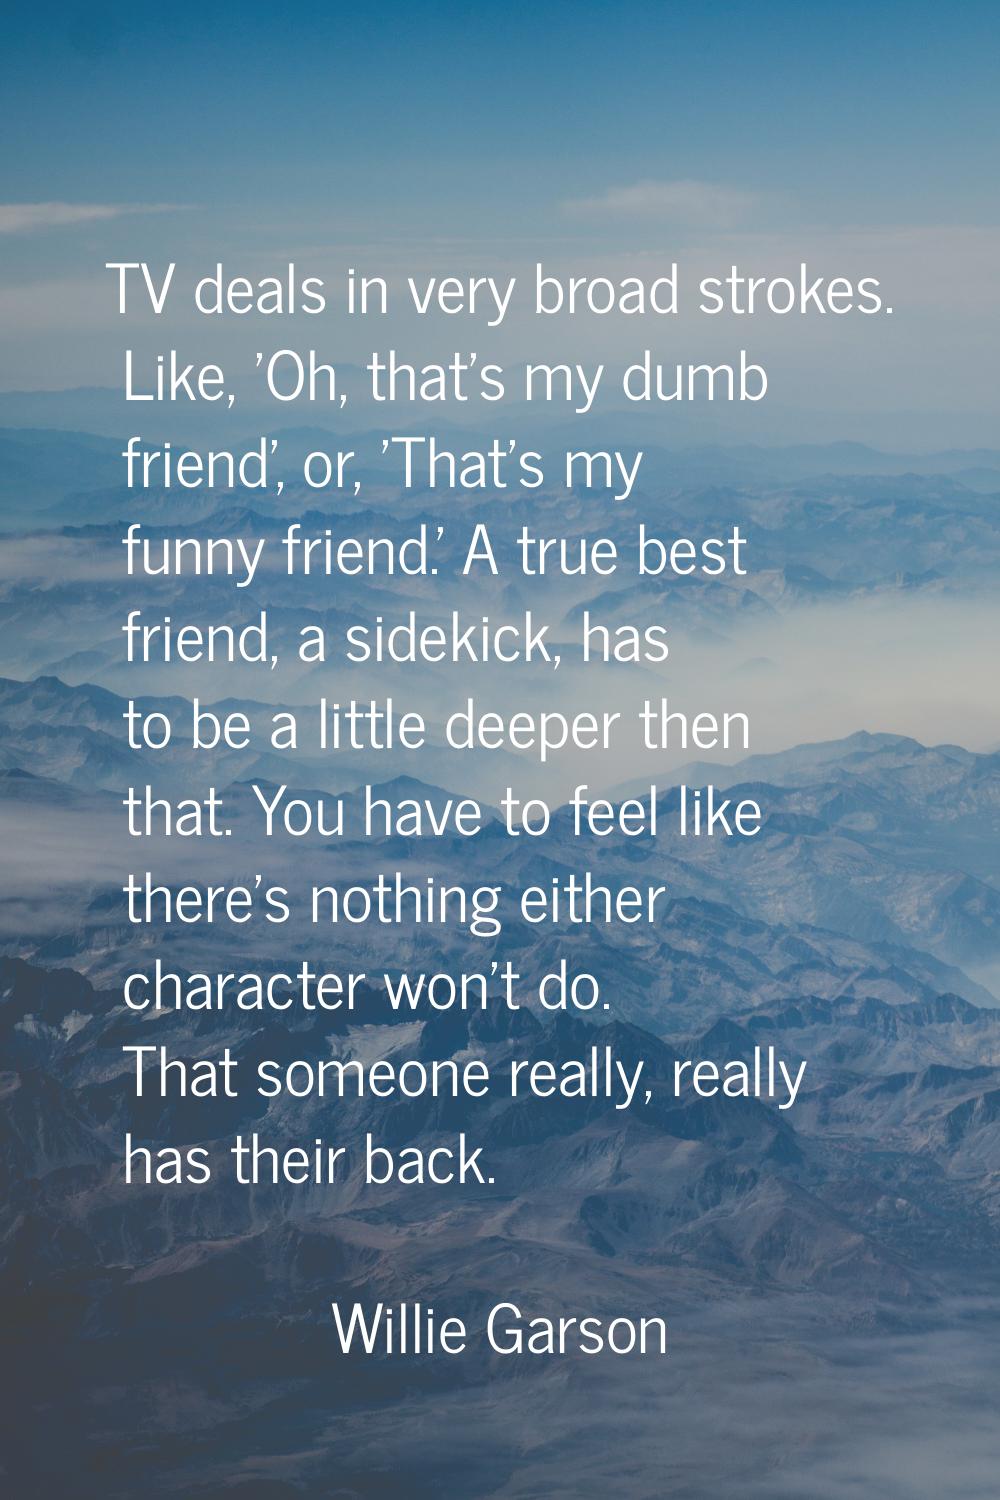 TV deals in very broad strokes. Like, 'Oh, that's my dumb friend', or, 'That's my funny friend.' A 